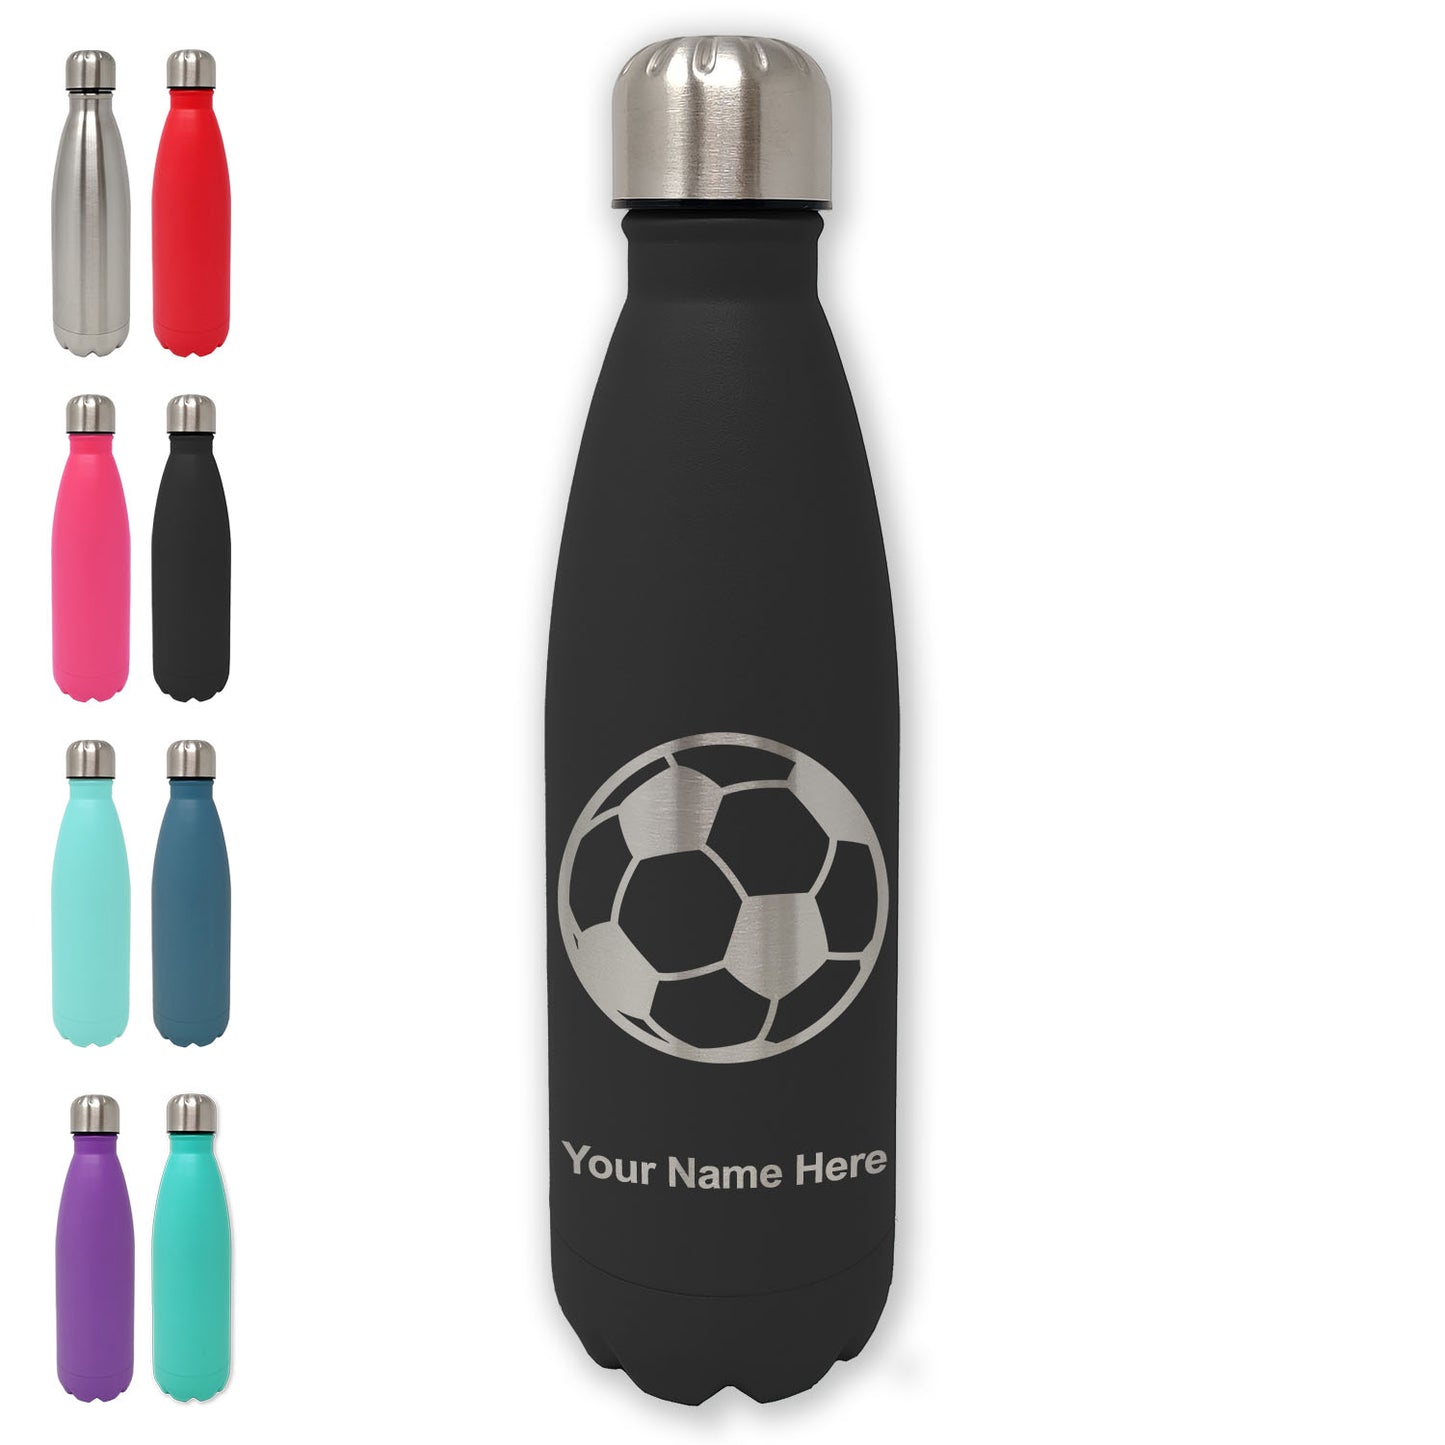 LaserGram Double Wall Water Bottle, Soccer Ball, Personalized Engraving Included